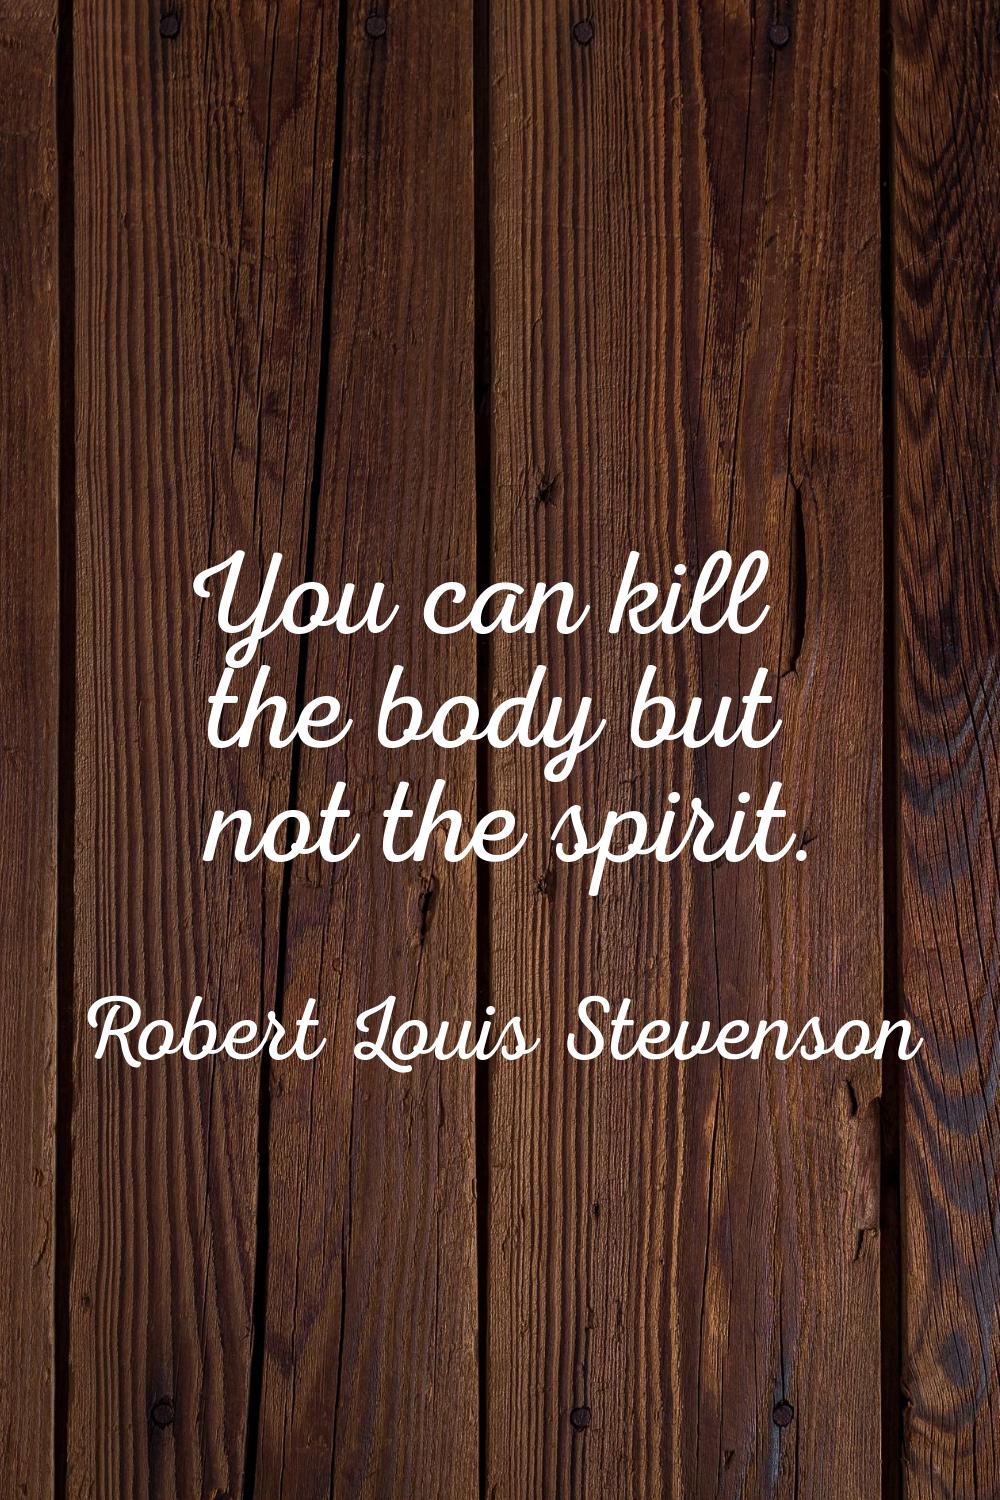 You can kill the body but not the spirit.